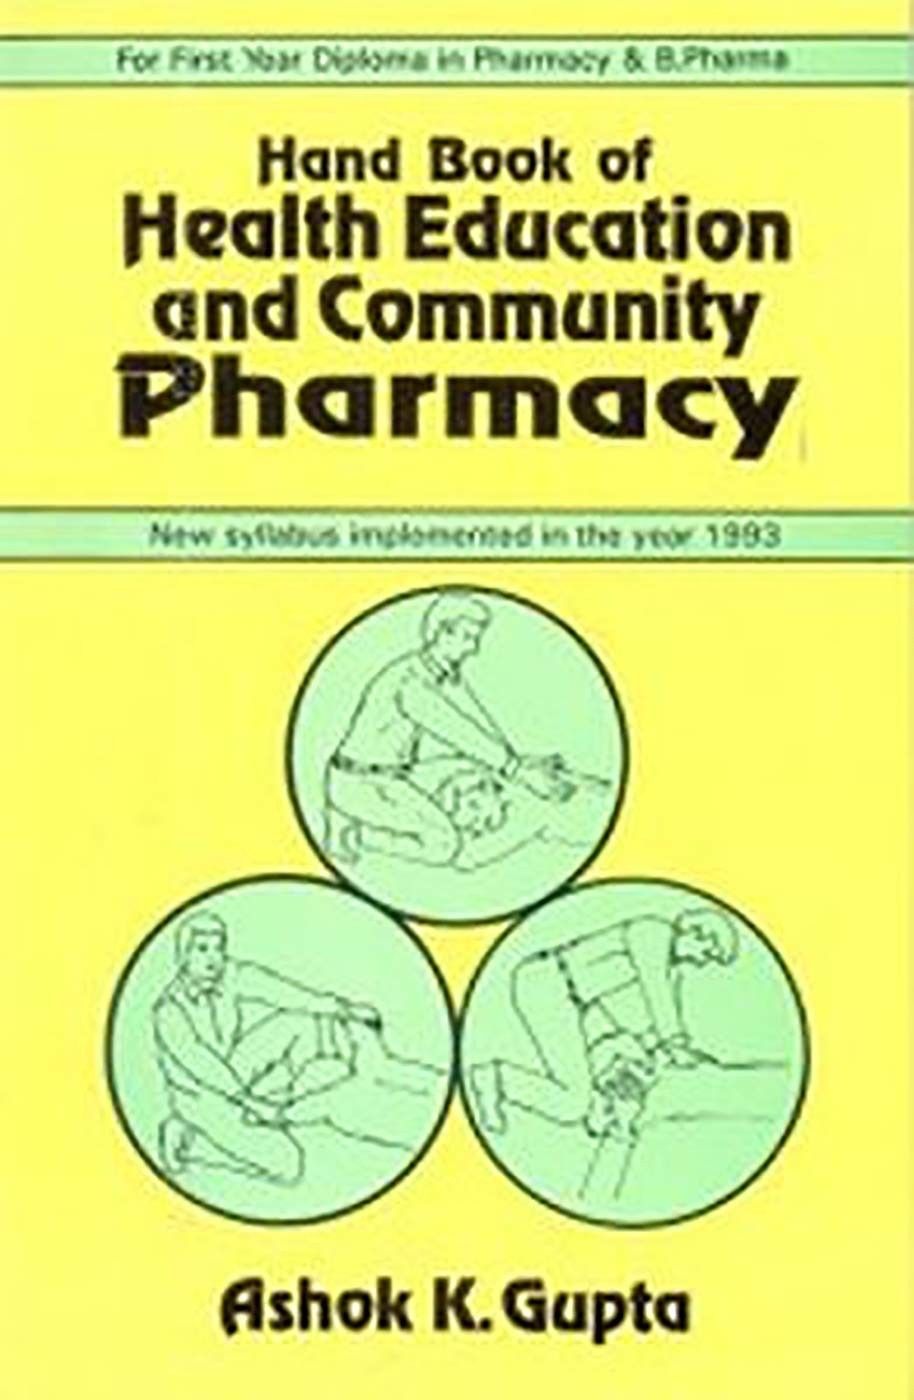 HAND BOOK OF HEALTH EDUCATION AND COMMUNITY PHARMACY